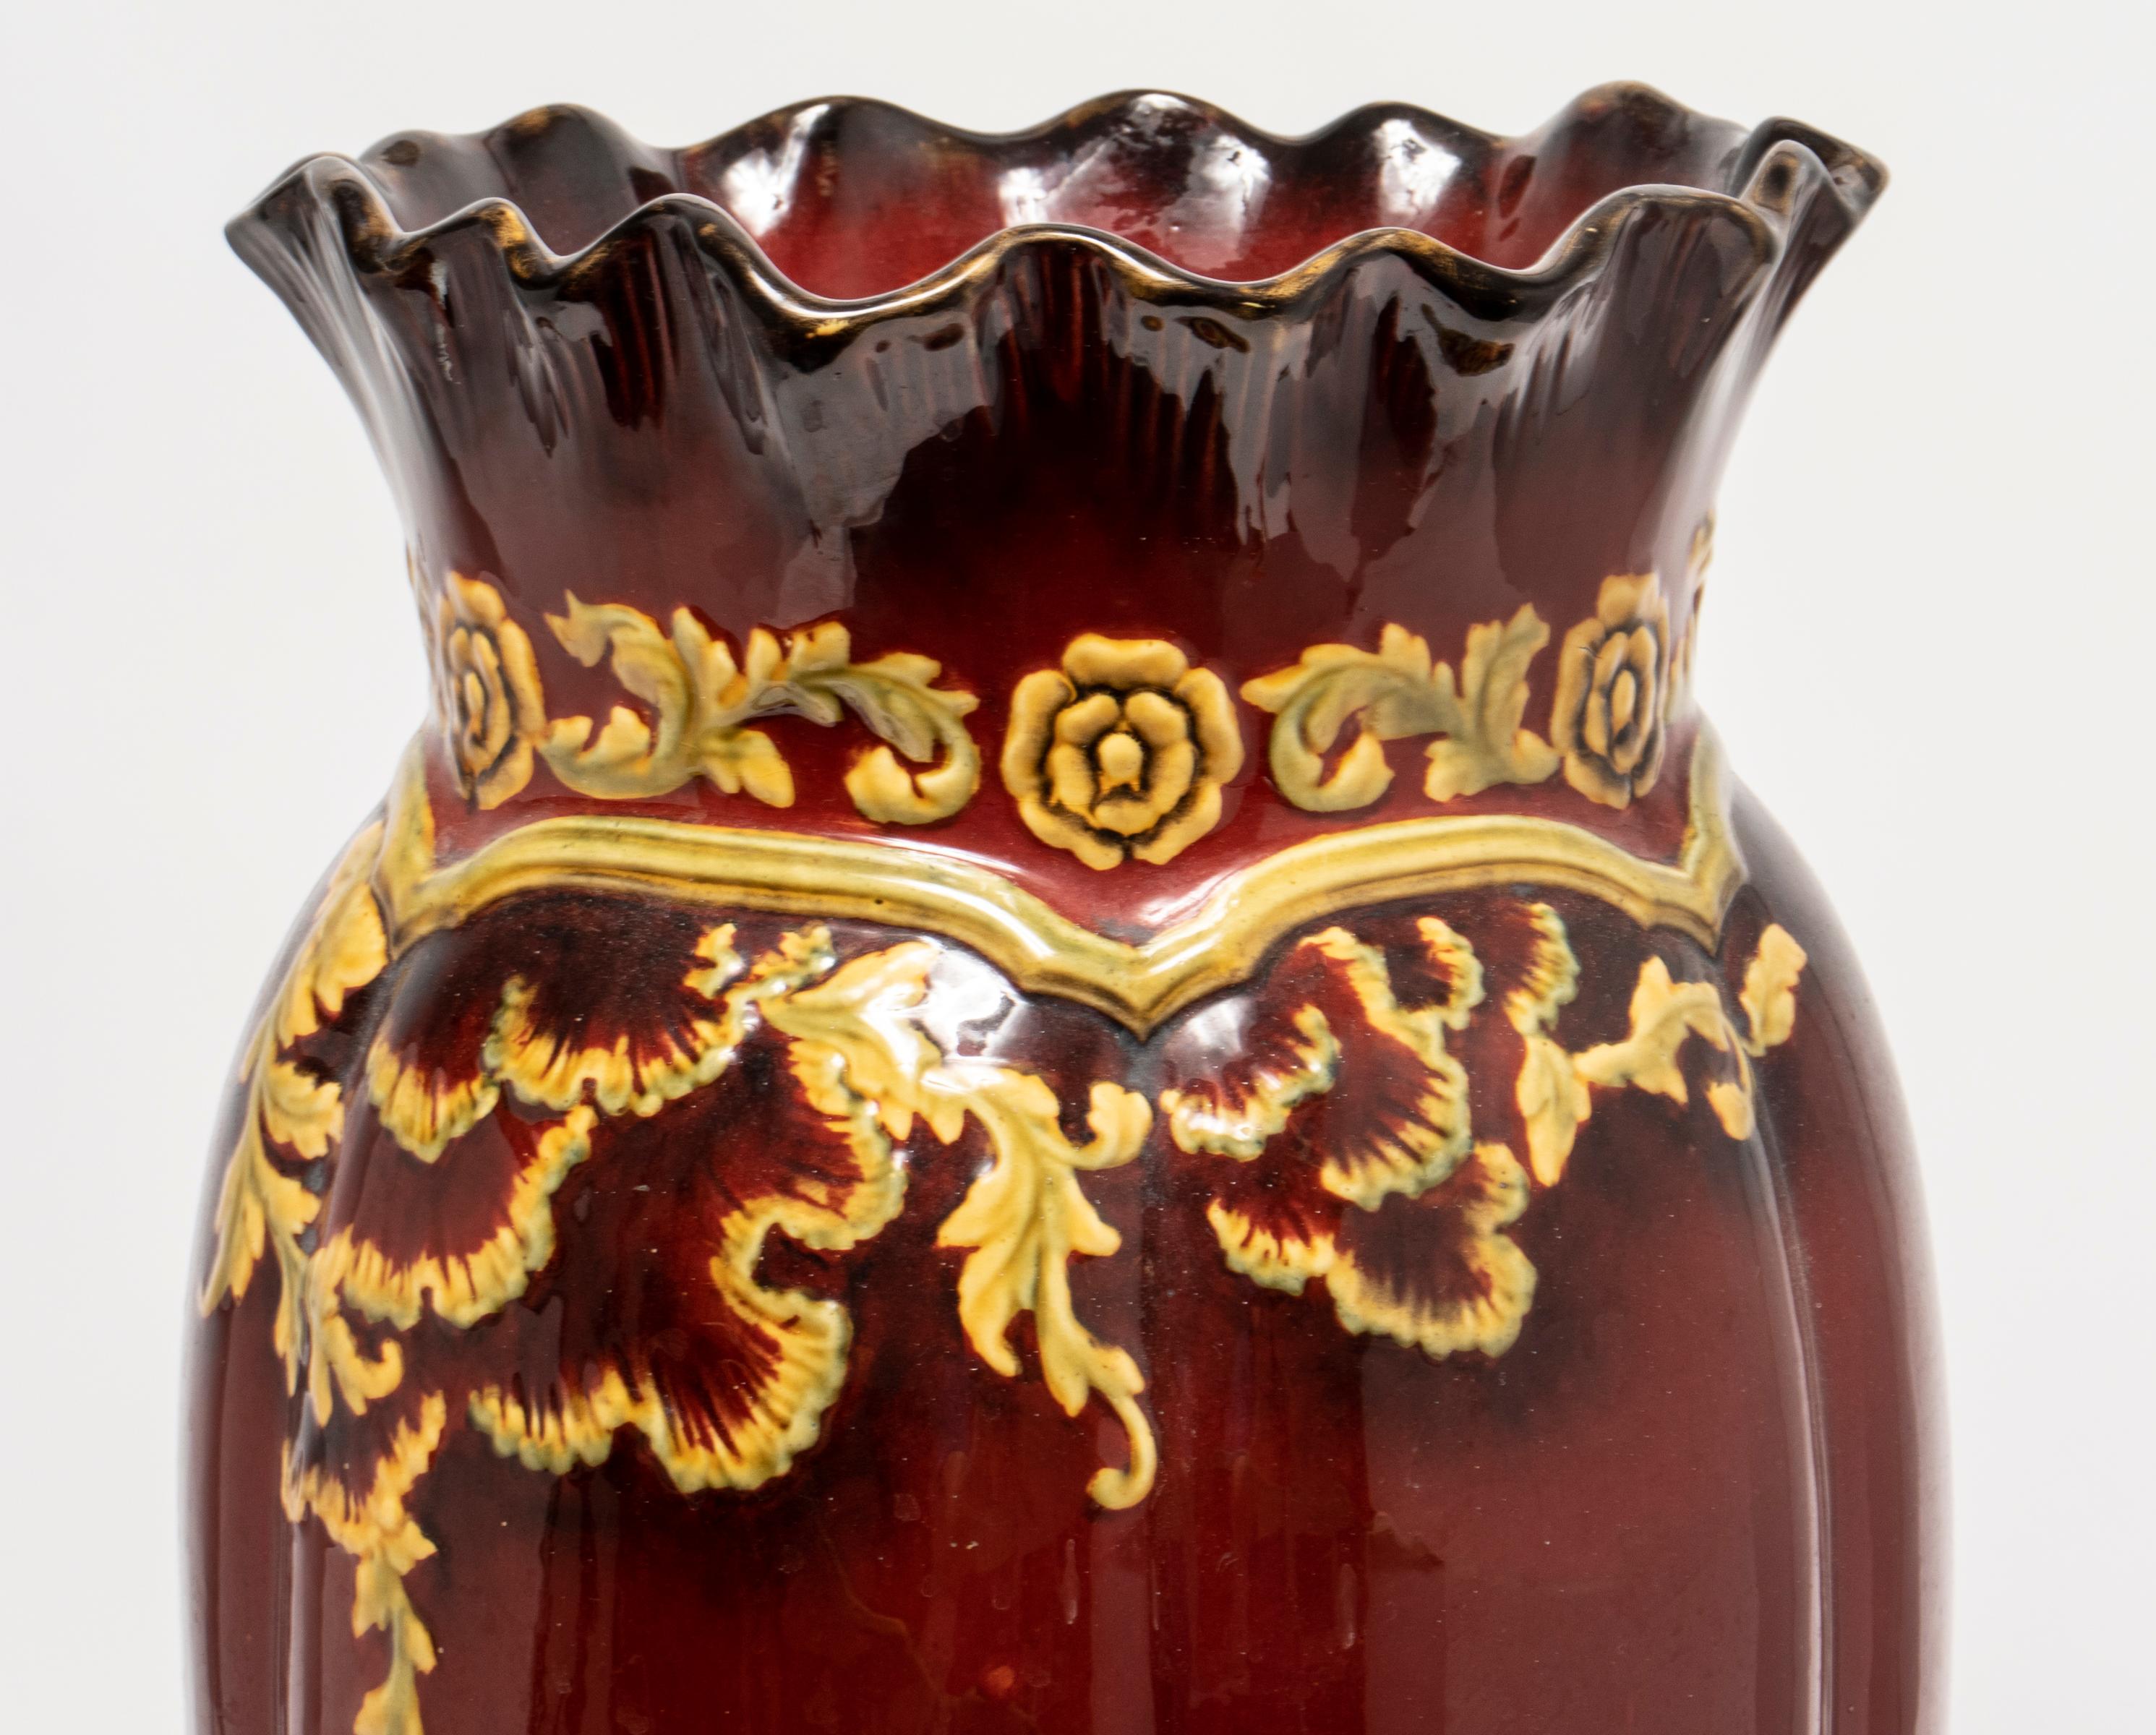 Ruby ware English glazed pottery umbrella stand, in the style of Royal Doulton, red ground with yellow floral motif decoration, in the Arts & Crafts or Art Nouveau taste, maker's marks underside. Measures: 21.5